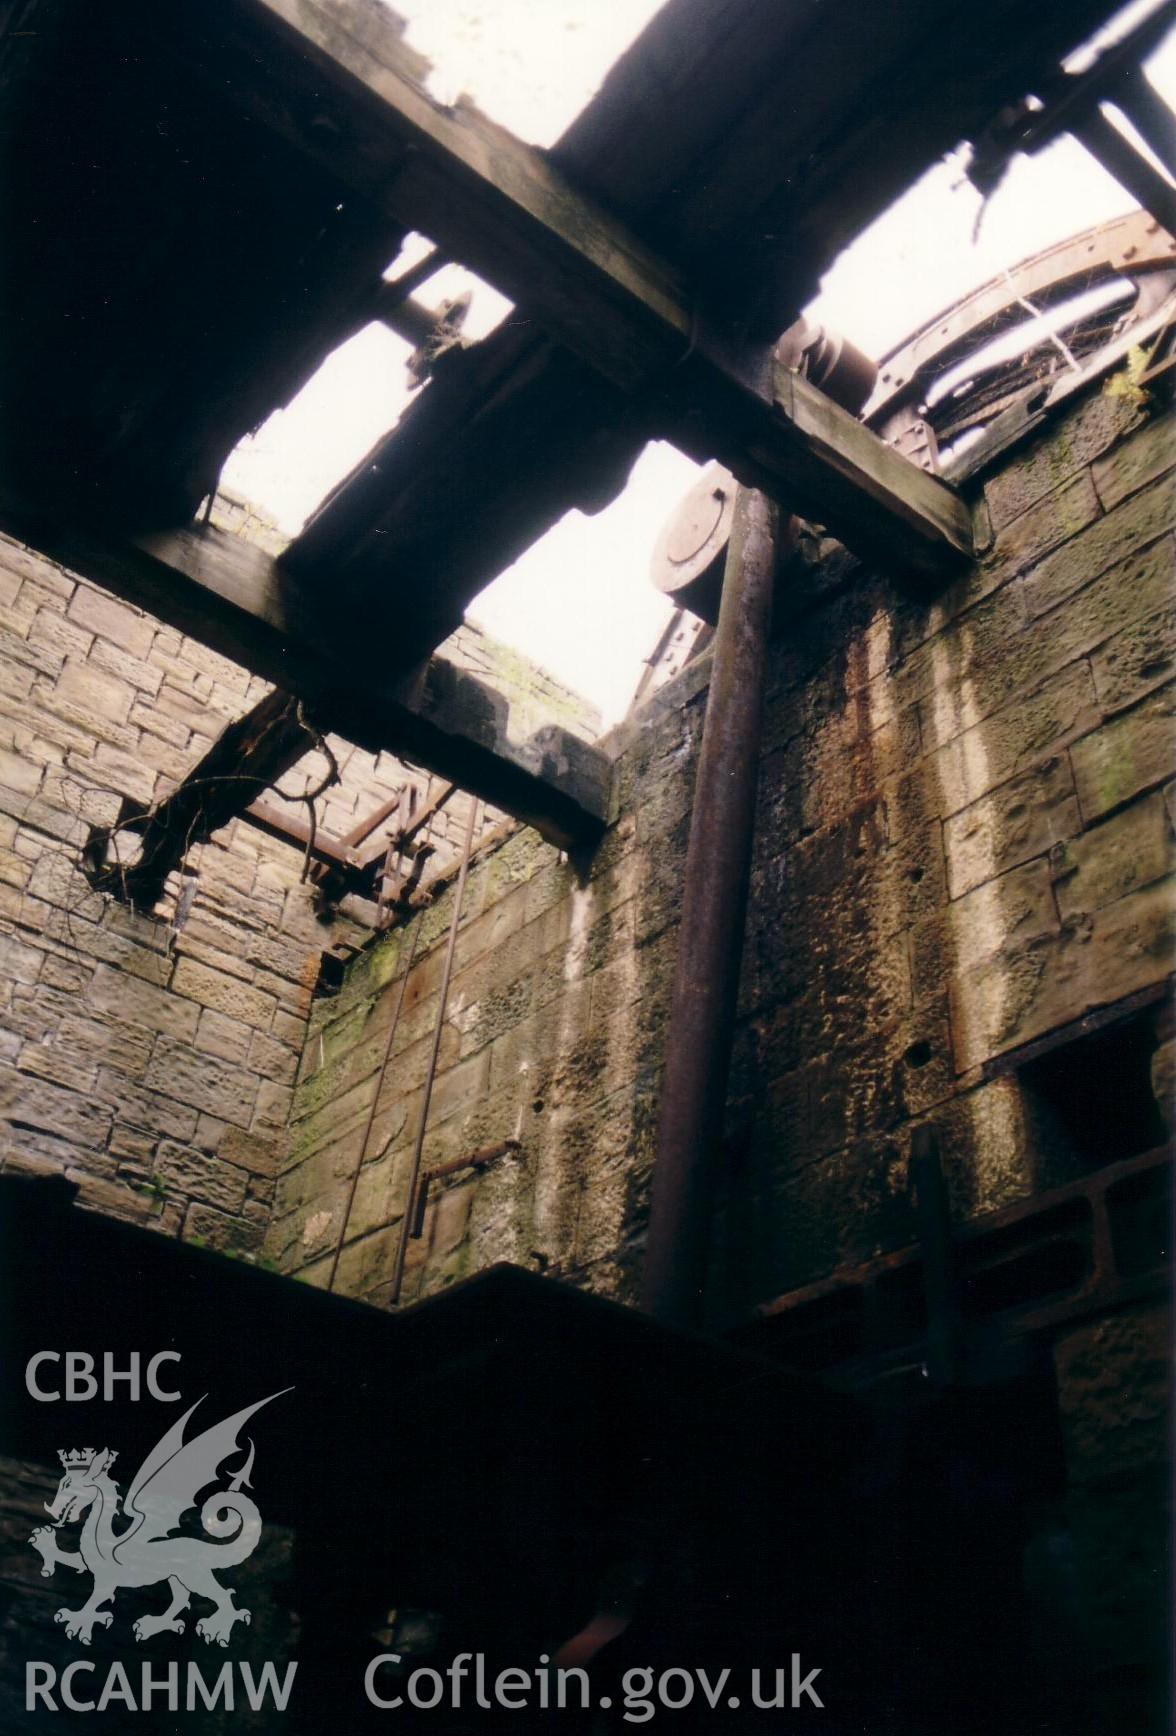 Vertical engine house, interior view.